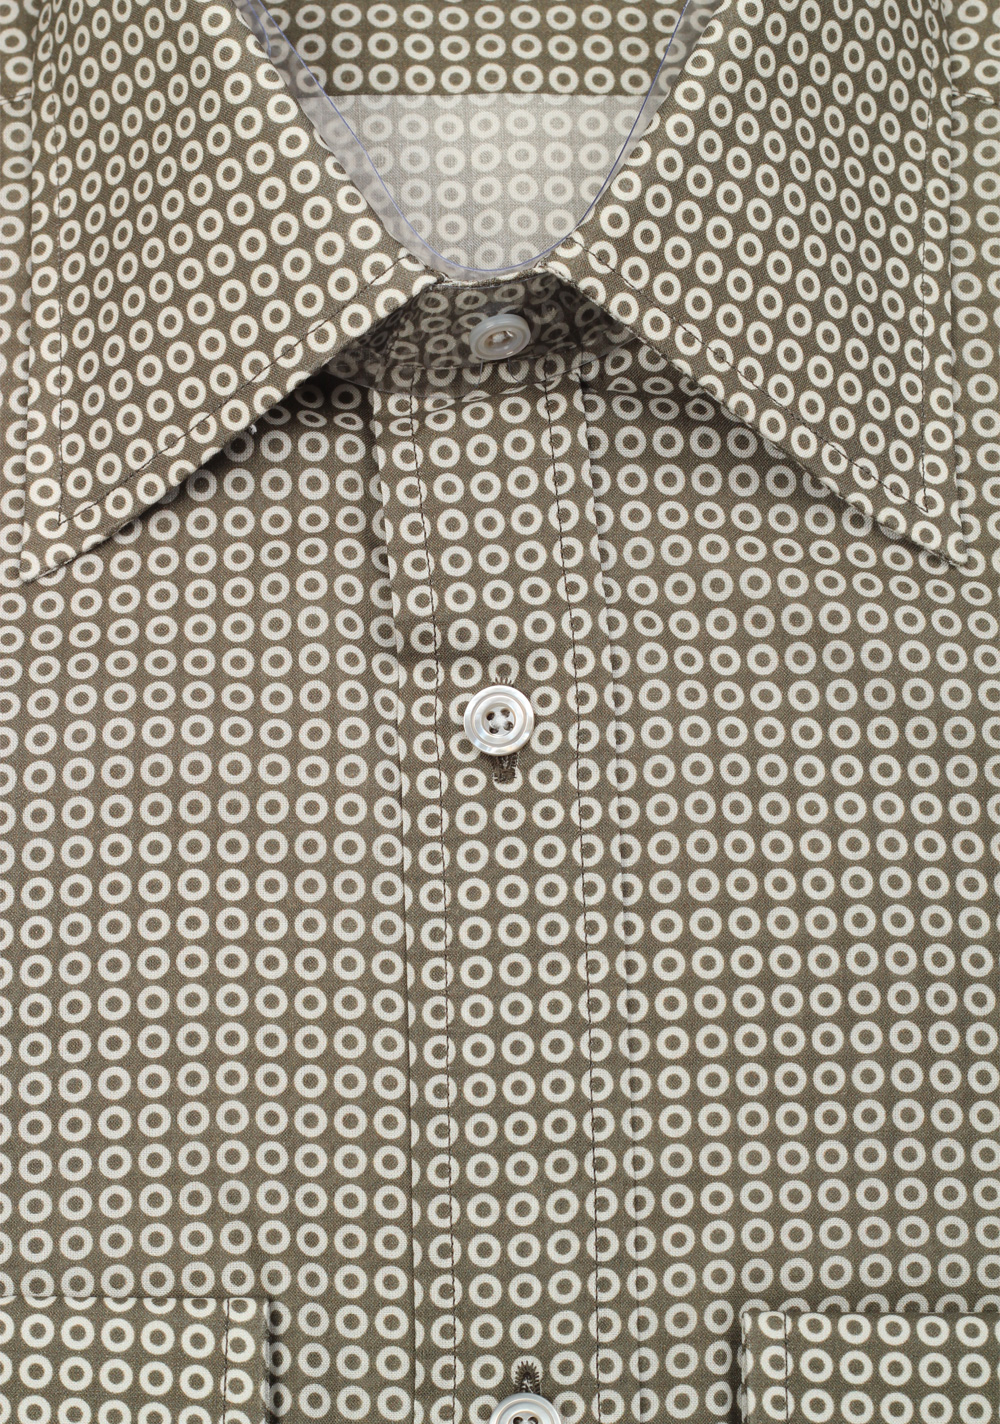 TOM FORD Patterned Green Shirt Size 40 / 15,75 U.S. | Costume Limité